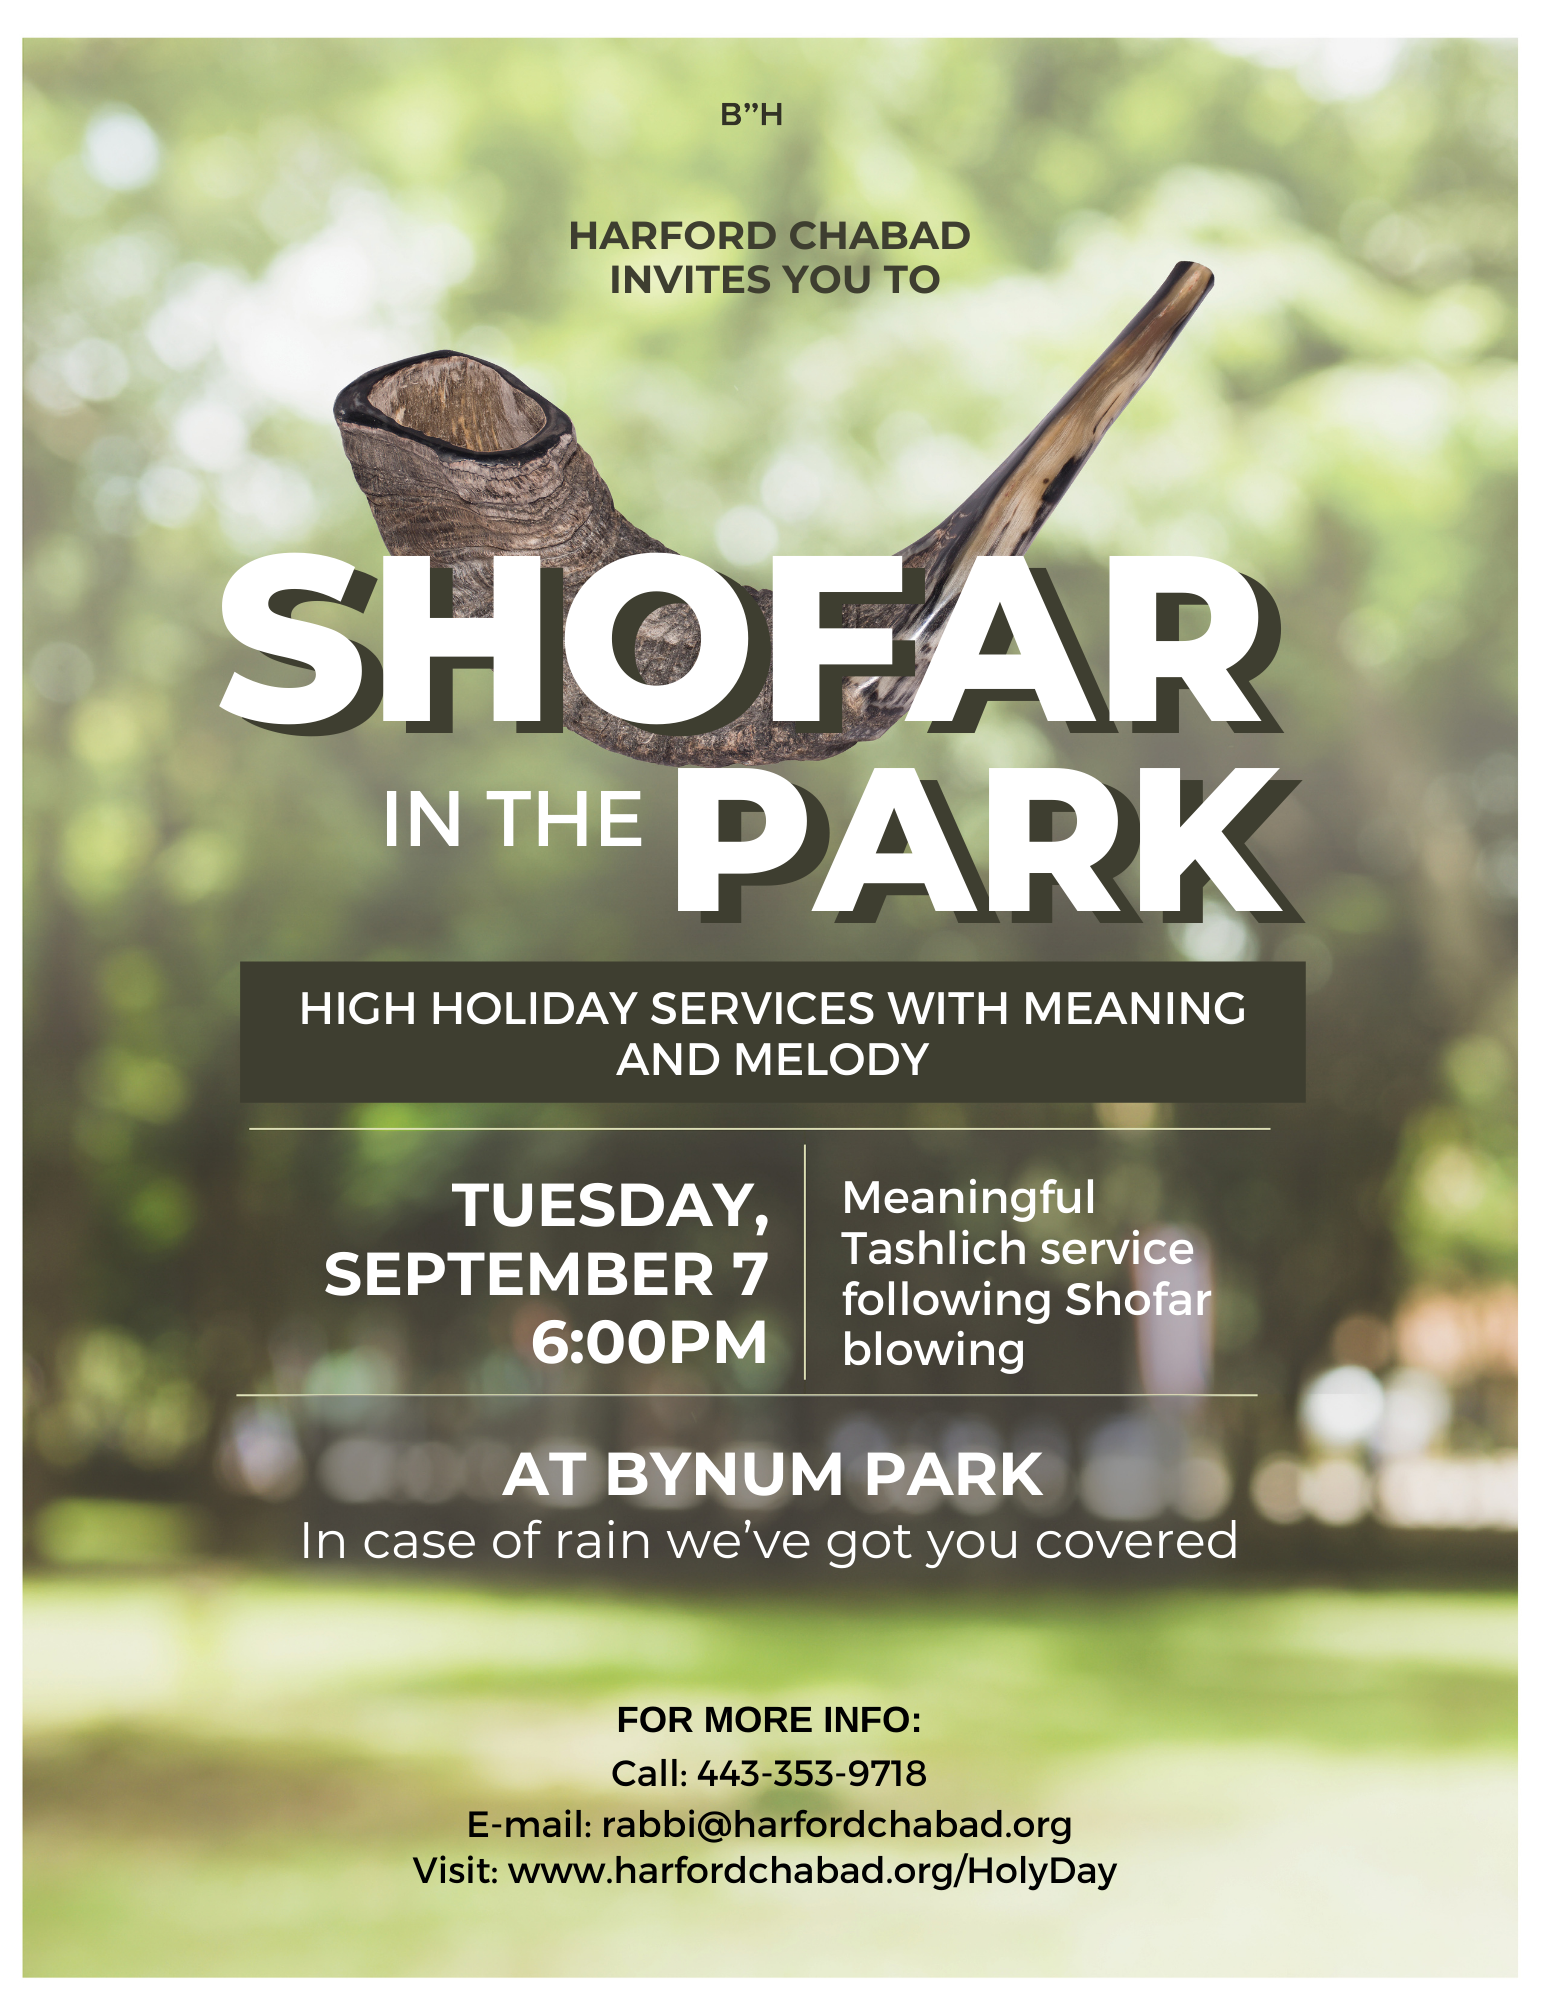 We have been tooting our own horn and we are pretty good at it. Jews have been blowing the Shofar, a simple hollowed-out ram’s horn, for thousands of years in celebration of Rosh Hashanah – also known as the birthday of humanity. But Shofar in the Park is NOT coming to a theater near you. It only happens on Monday September 8th at Bynum Run Park from 6:00 to 6:30 pm. It will not be broadcasted, rebroadcasted, or podcasted. In fact, according to ancient prescription, one must hear the blasts directly from the Shofar itself. It is a 